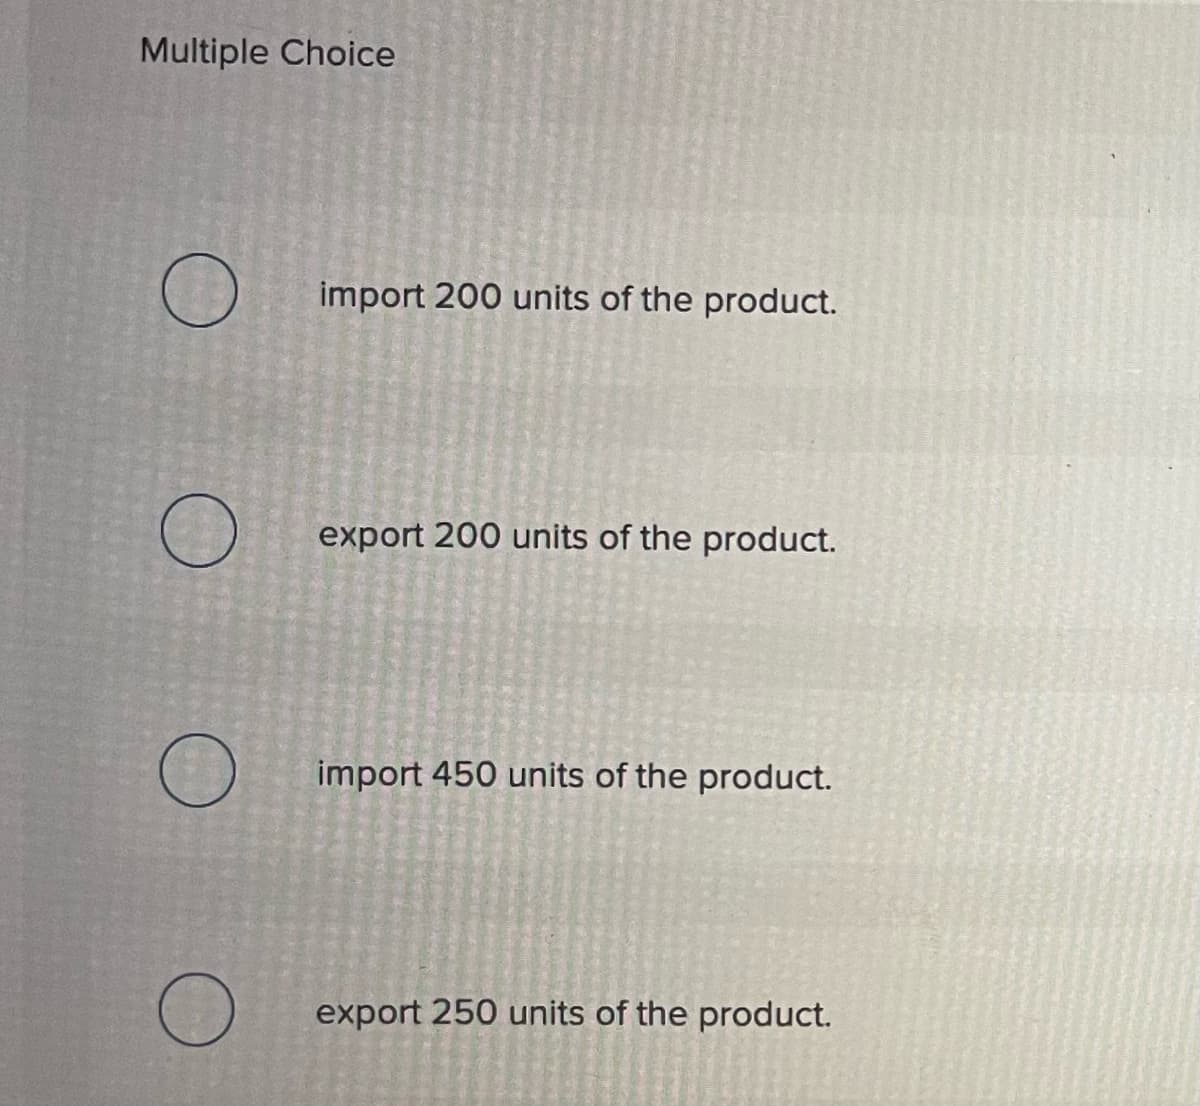 Multiple Choice
import 200 units of the product.
export 200 units of the product.
import 450 units of the product.
export 250 units of the product.
